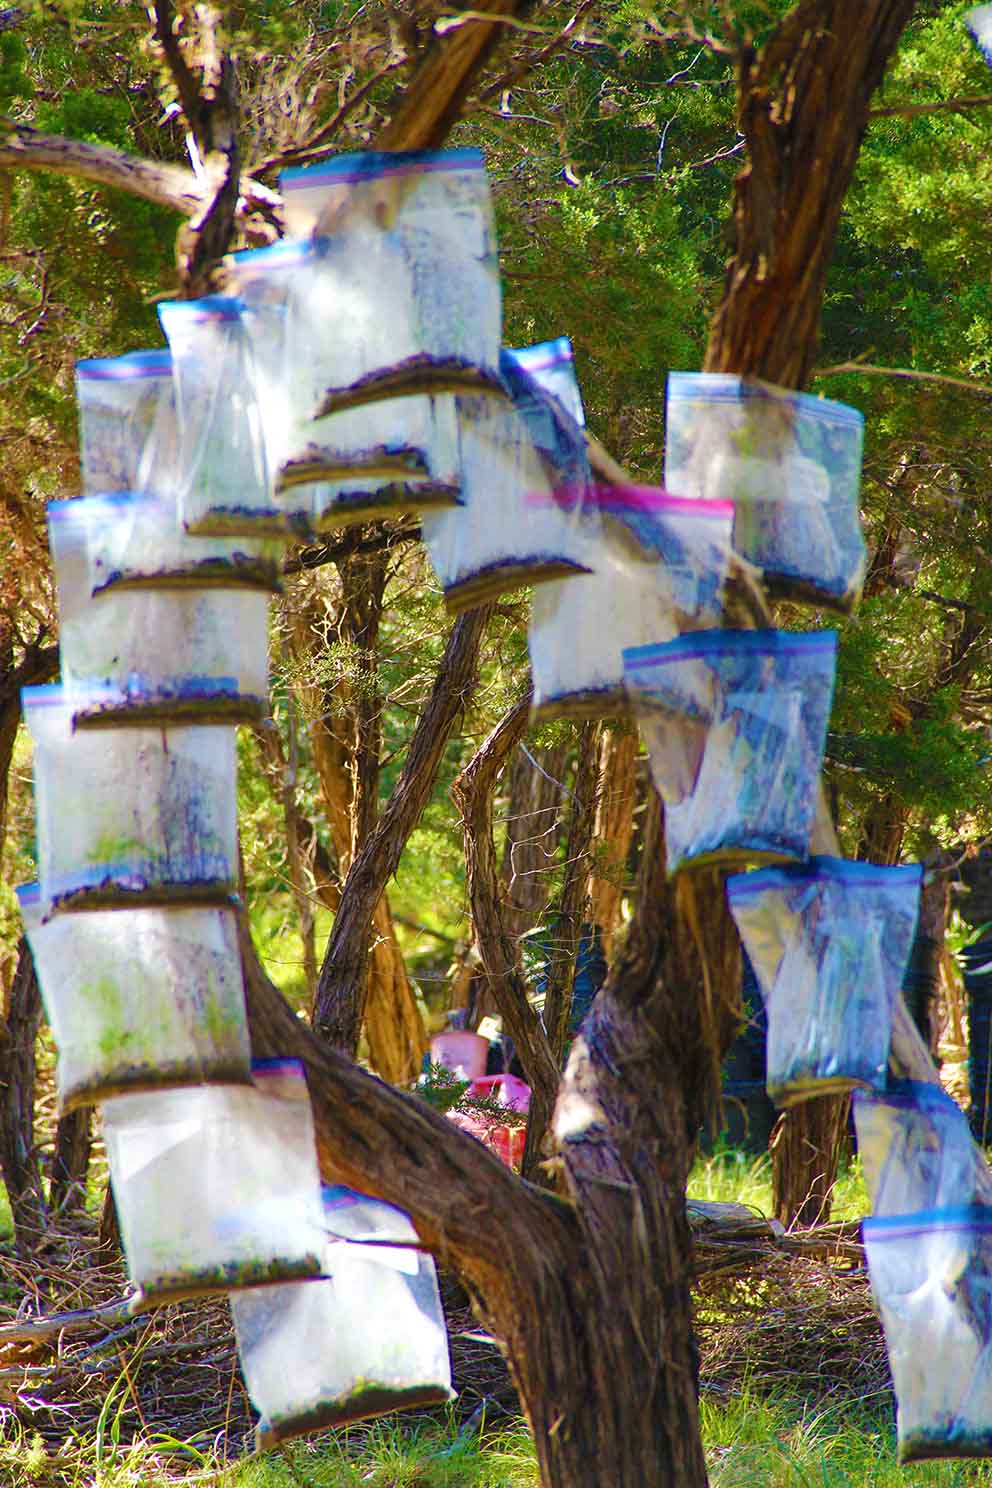 Image with several ziploc bags with living forests inside, invention by austin artist to reforest the world